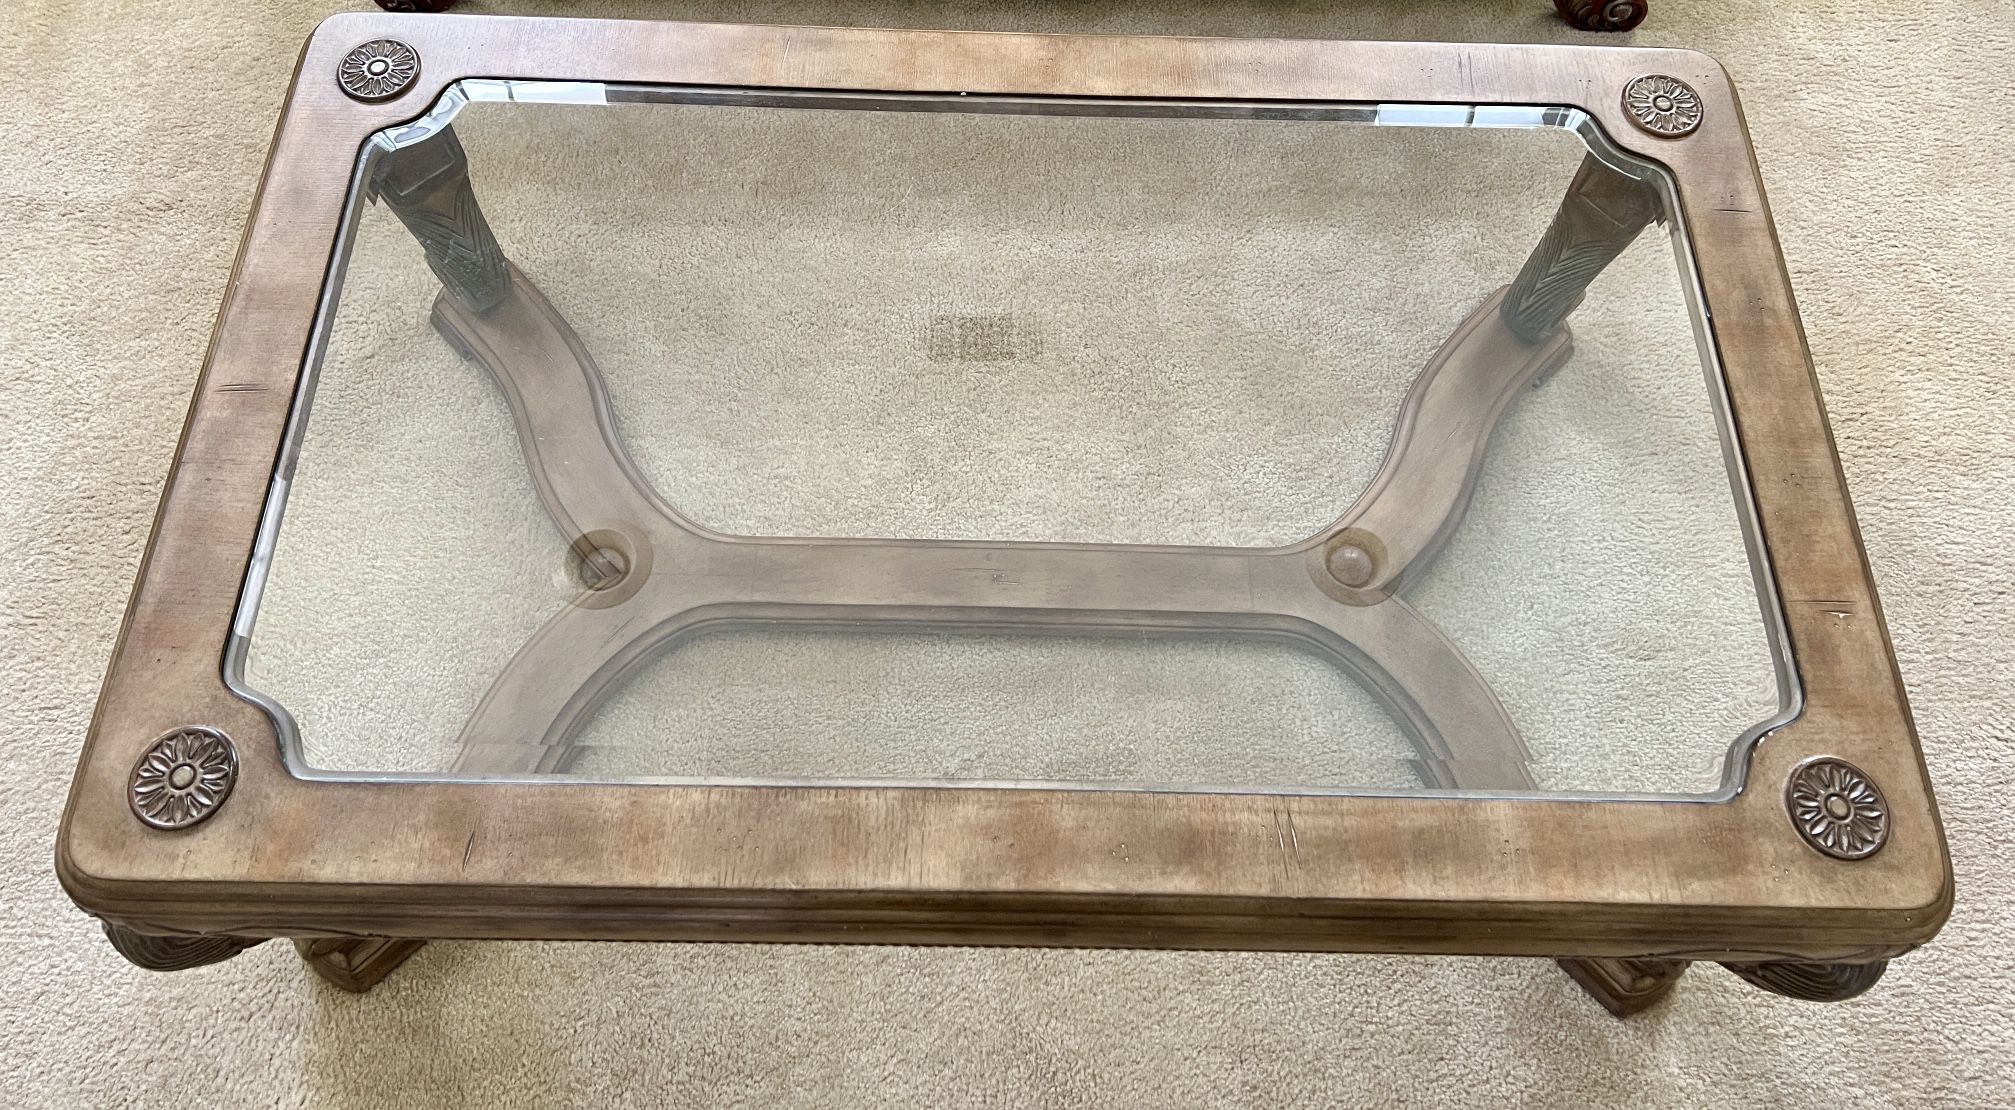 Solid Wood Glass Top Coffee Table